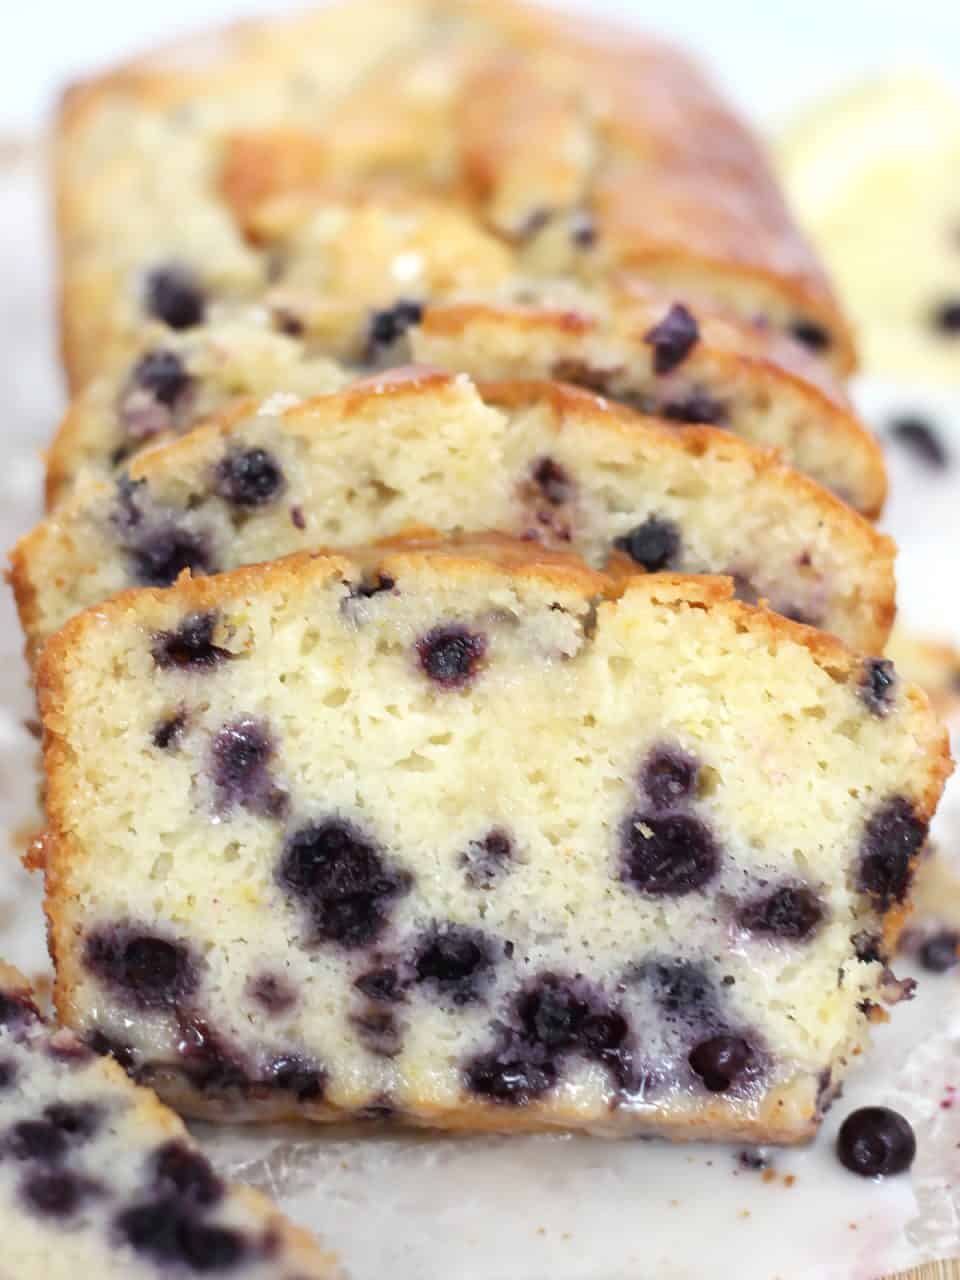 Lemon and blueberry pound cake cut into slices.